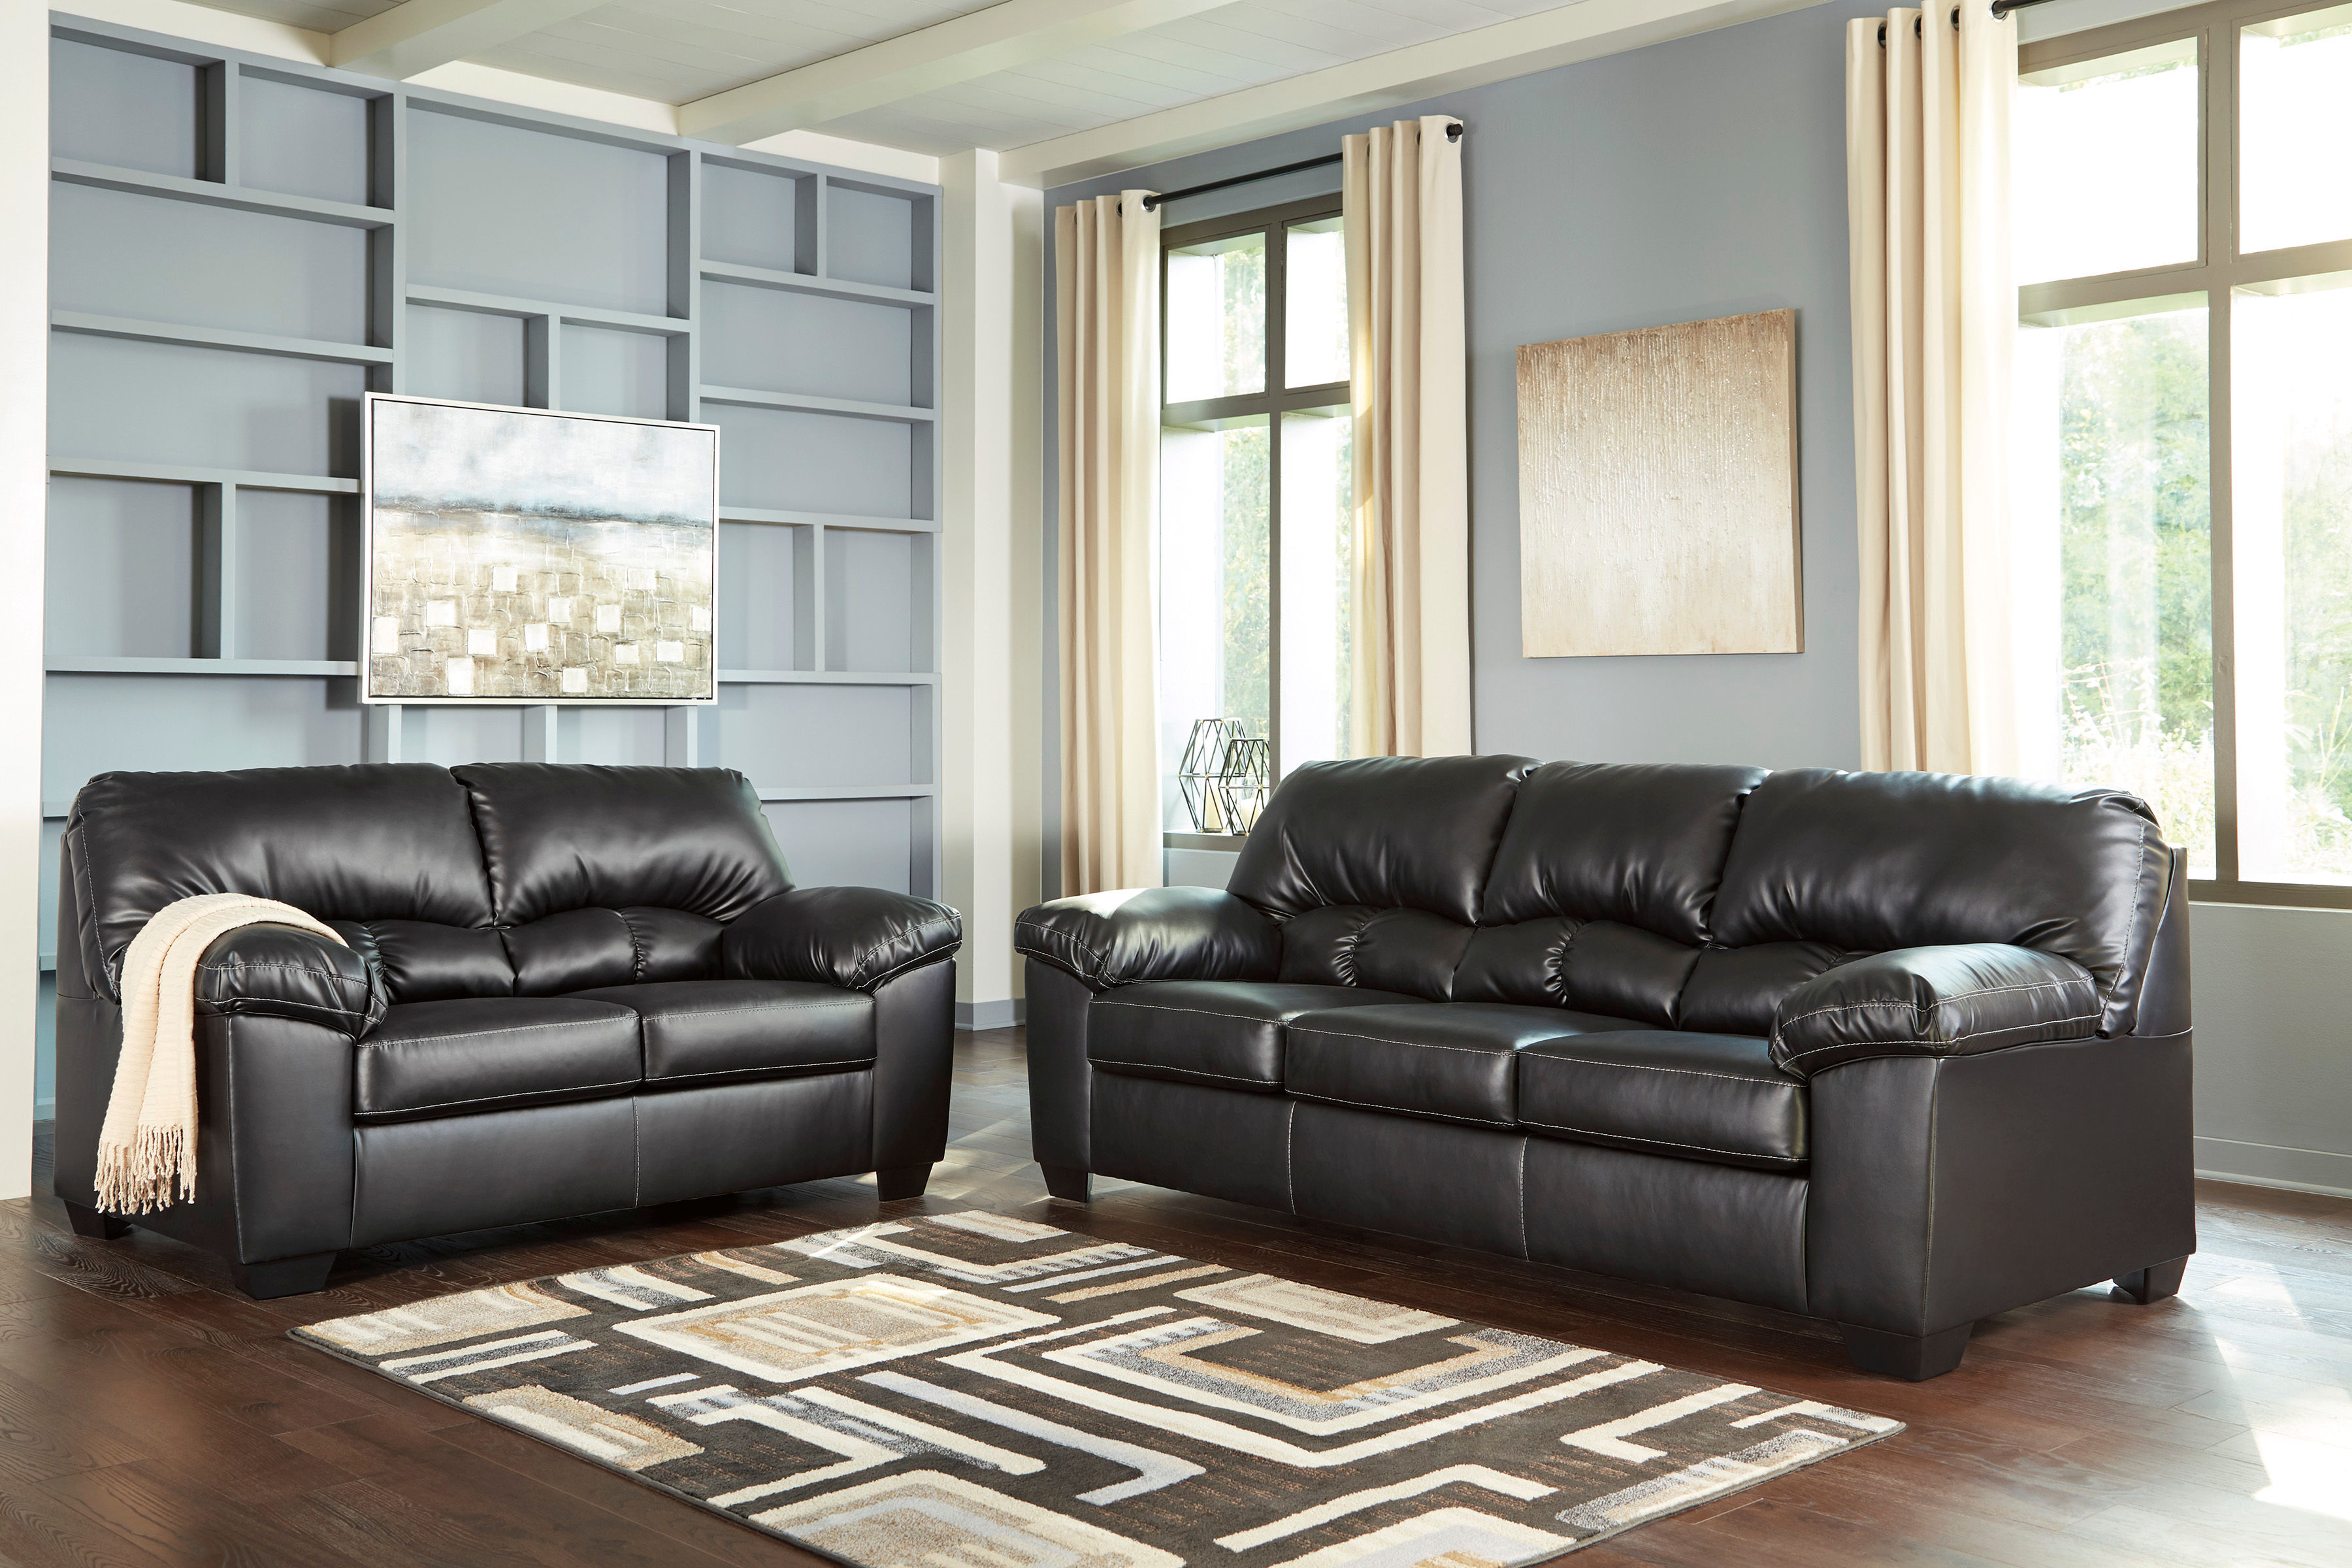 Rent Benchcraft Brazoria Black Sofa And Loveseat Same Day Delivery At Rent A Center